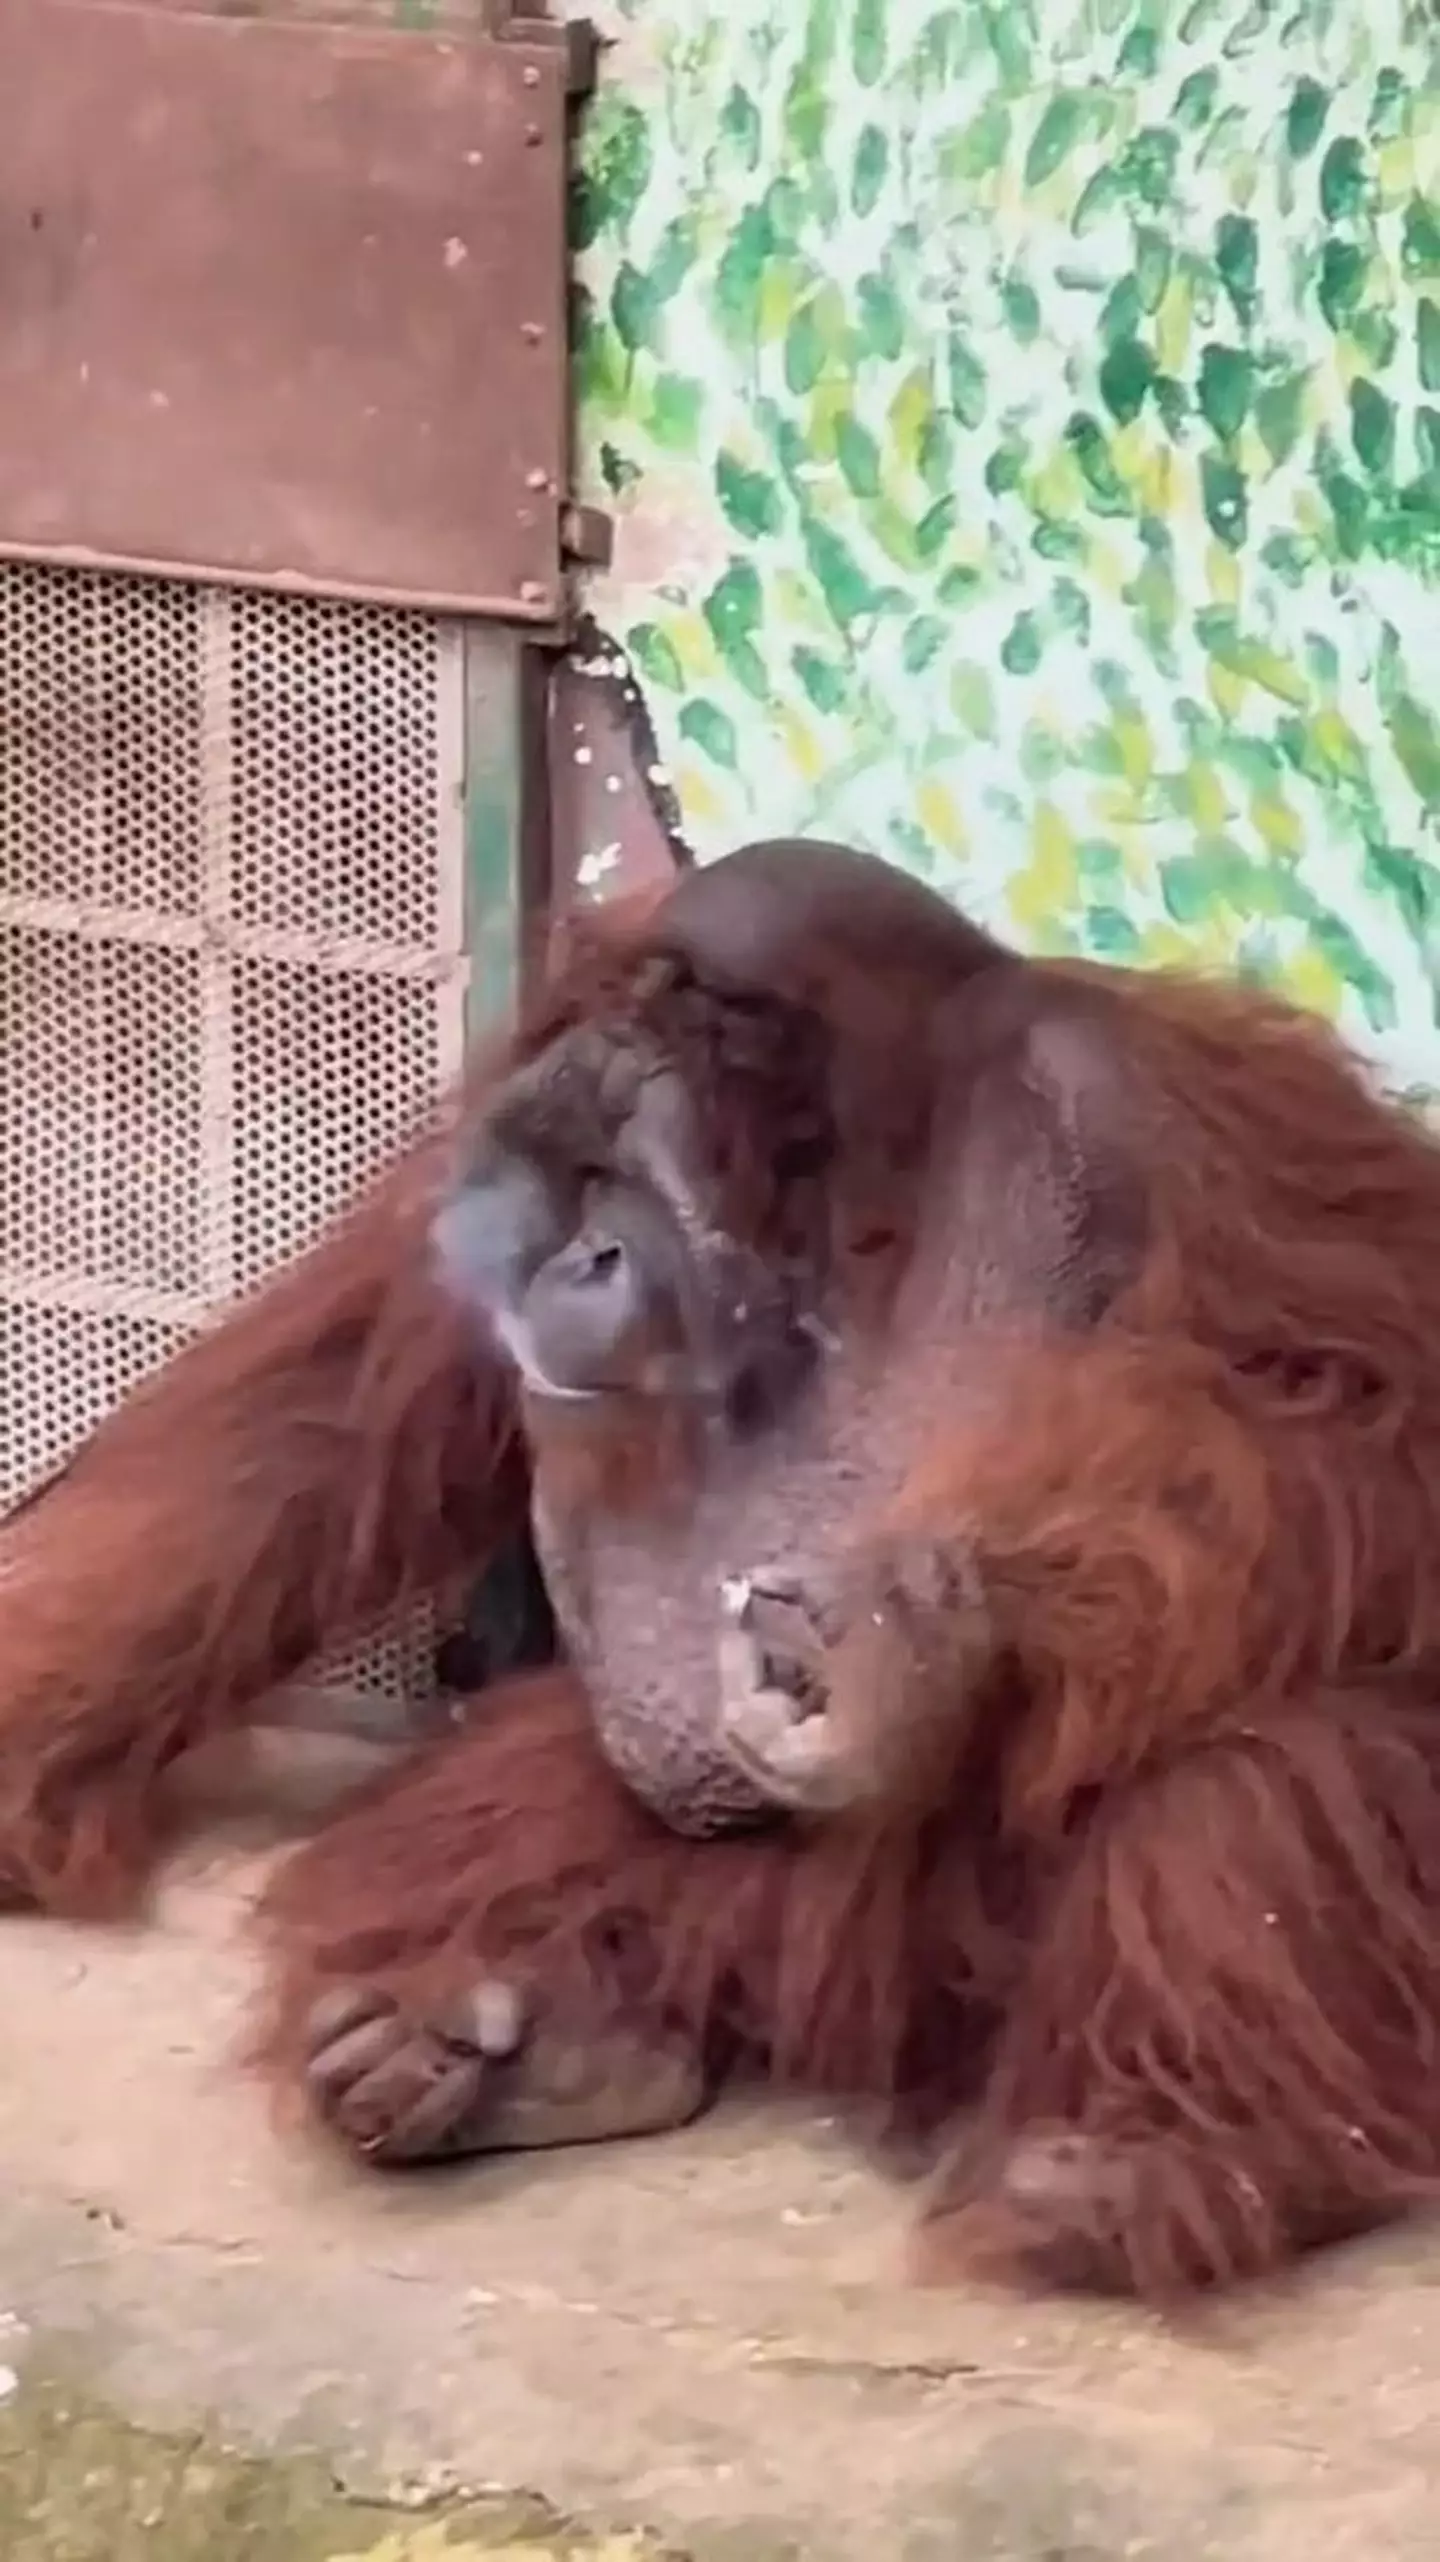 The orangutan took two puffs before putting out the cigarette.